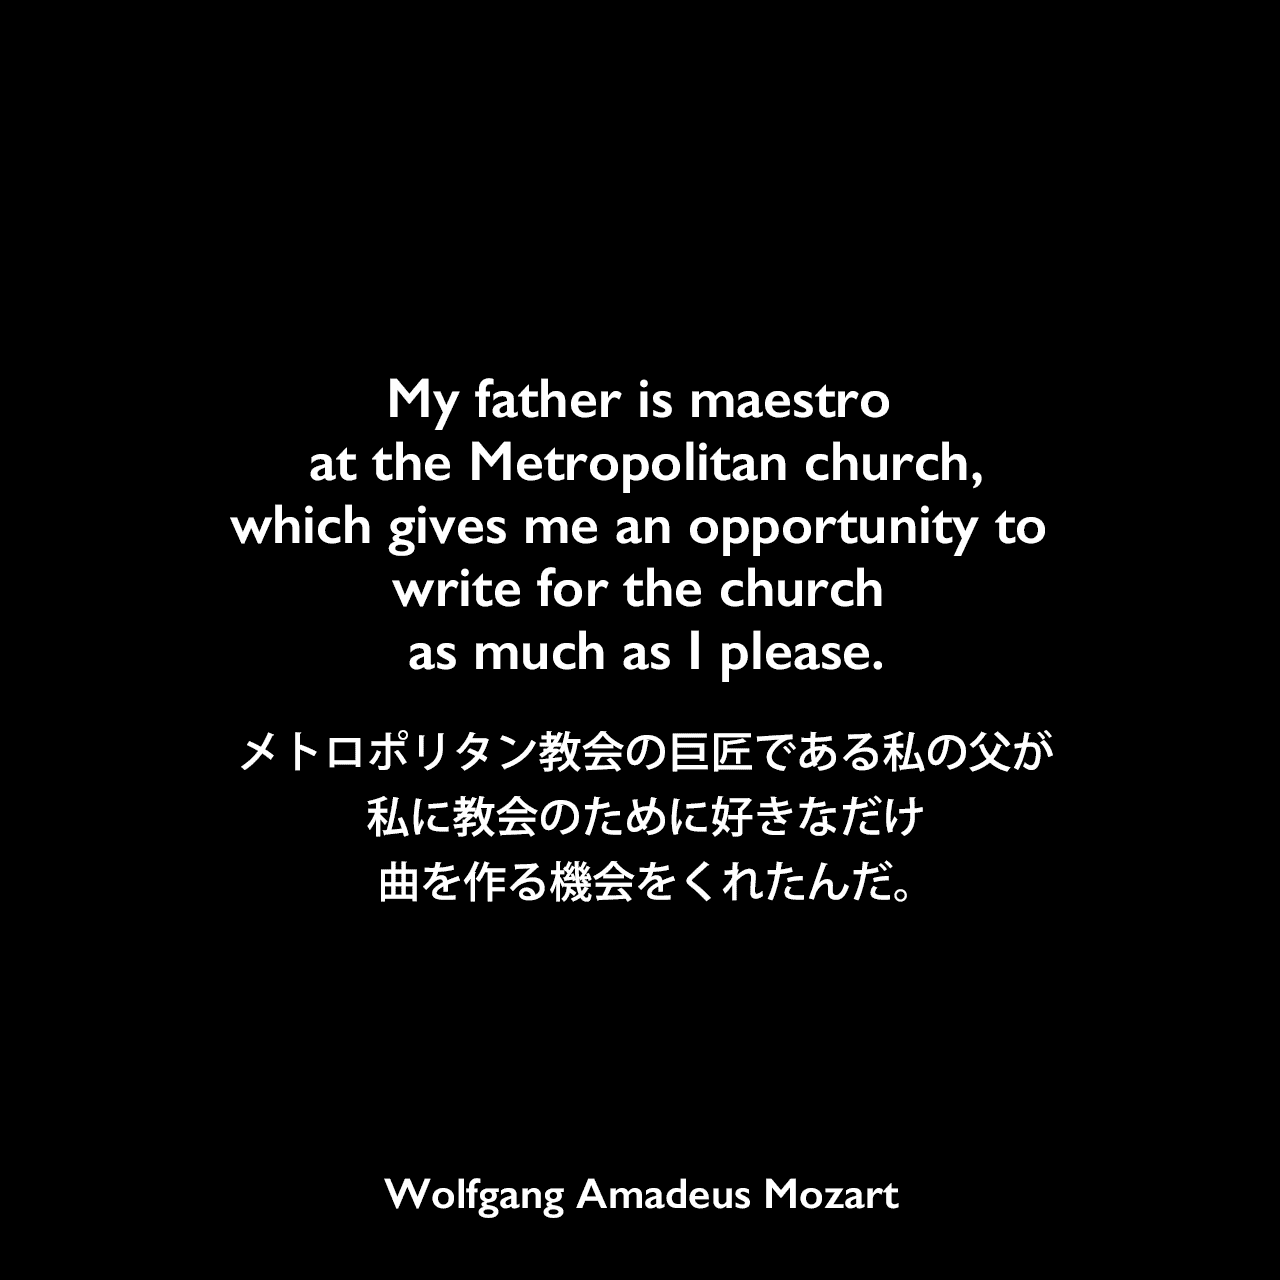 My father is maestro at the Metropolitan church, which gives me an opportunity to write for the church as much as I please.メトロポリタン教会の巨匠である私の父が、私に教会のために好きなだけ曲を作る機会をくれたんだ。Wolfgang Amadeus Mozart